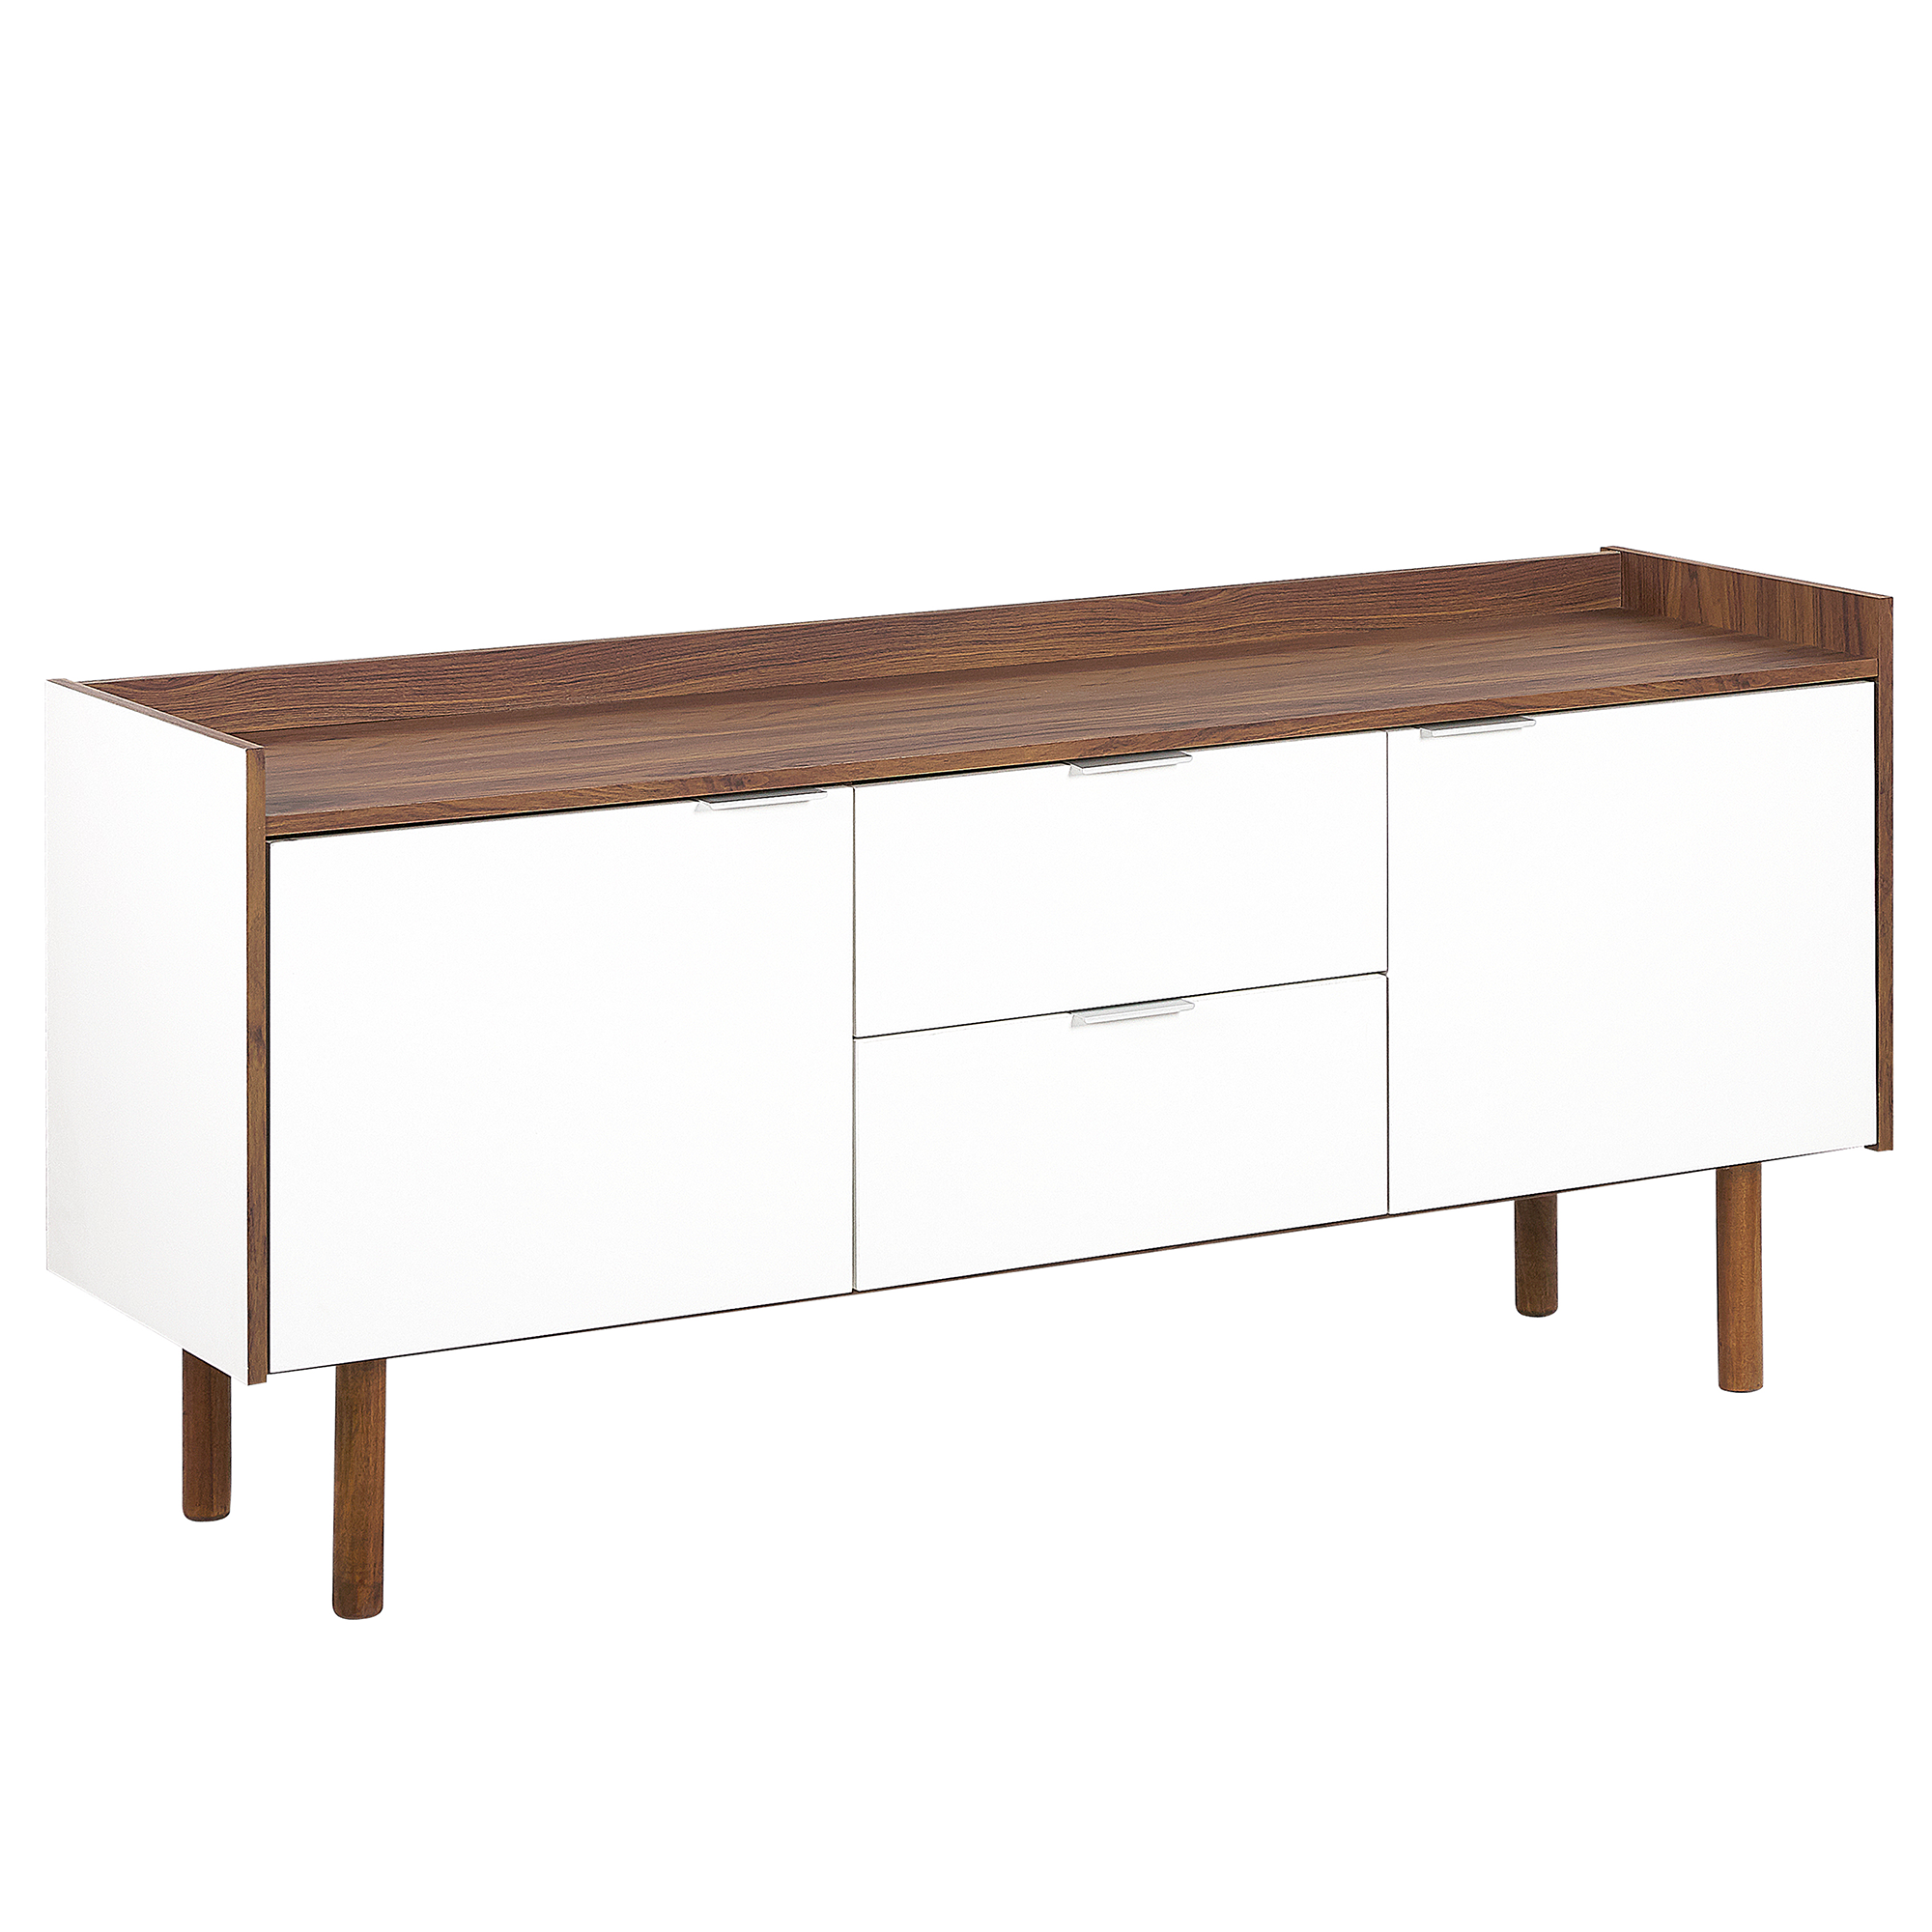 Beliani Sideboard White and Brown 68 x 149 cm with 2 Doors and Drawers Scandinavian